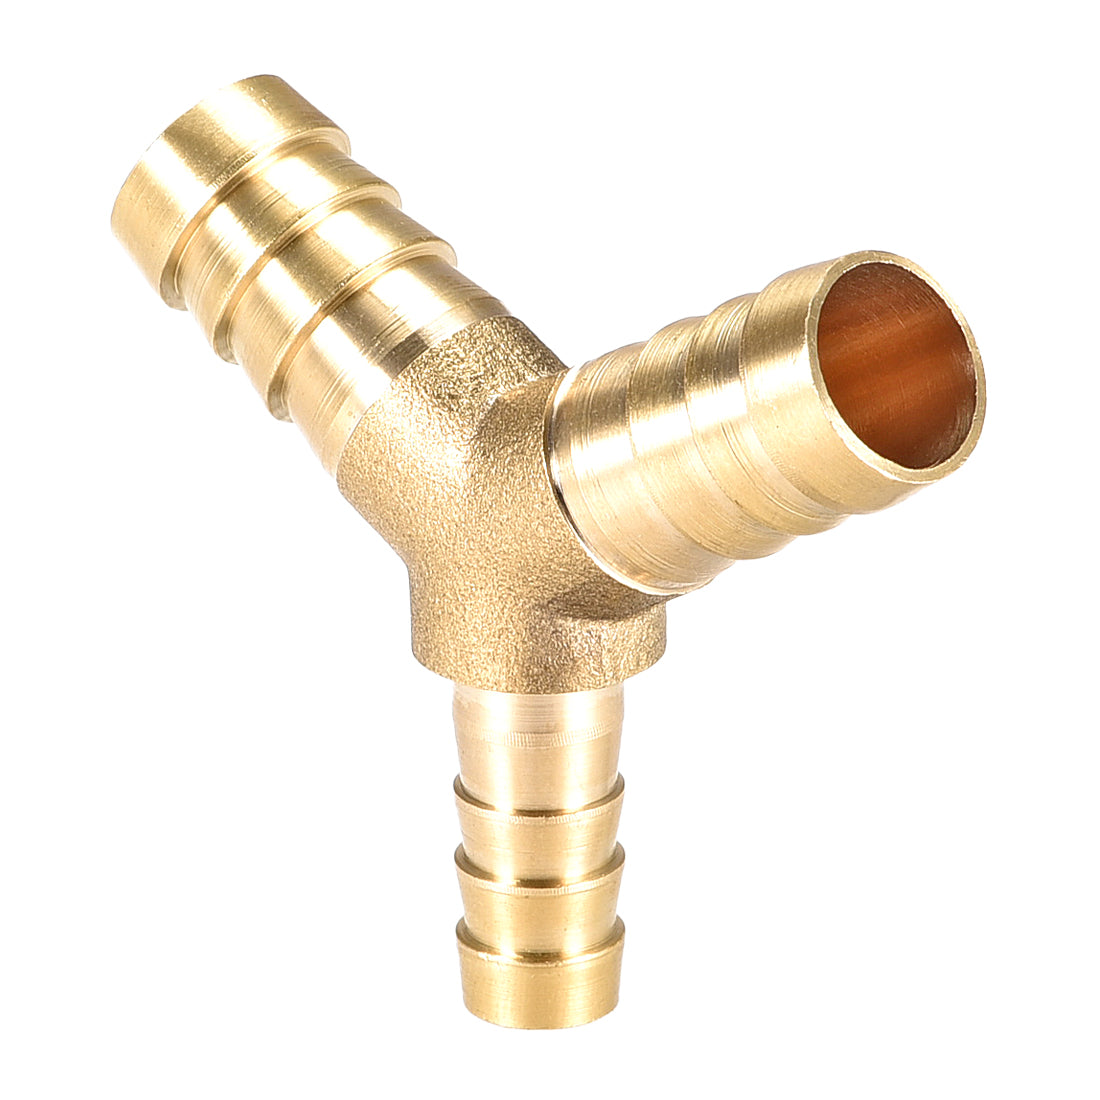 Uxcell Uxcell 8mm x 6mm x 8mm Hose ID Brass Reducer Barb Fitting Y-Shaped 3 Way Tee Connector Adapter 2pcs